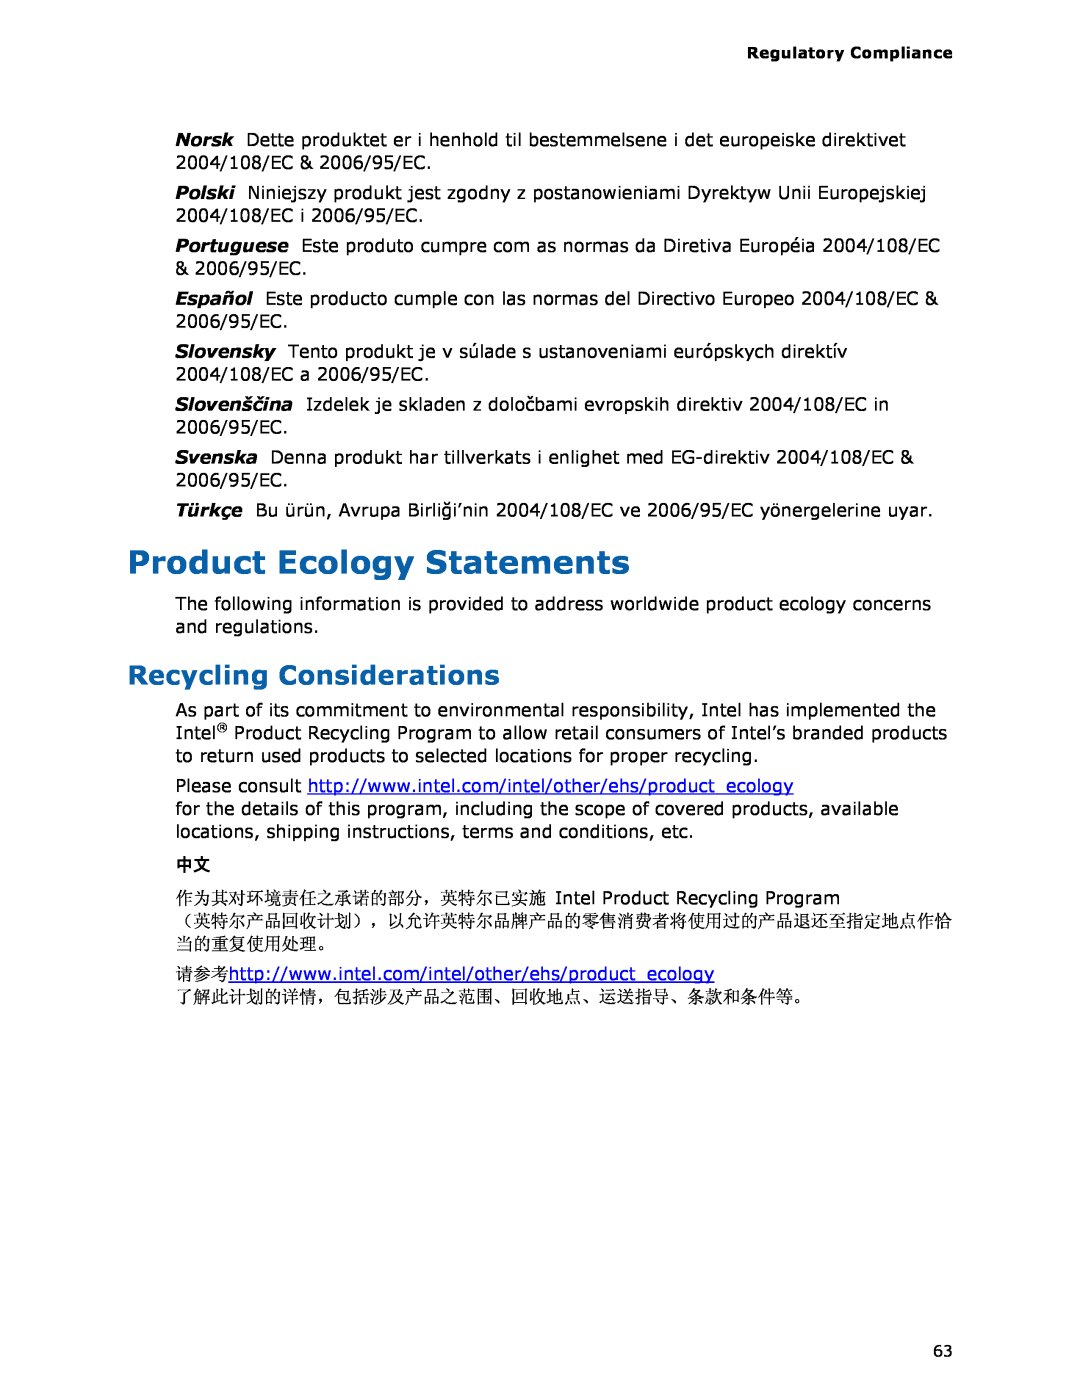 Intel D945GSEJT manual Product Ecology Statements, Recycling Considerations 